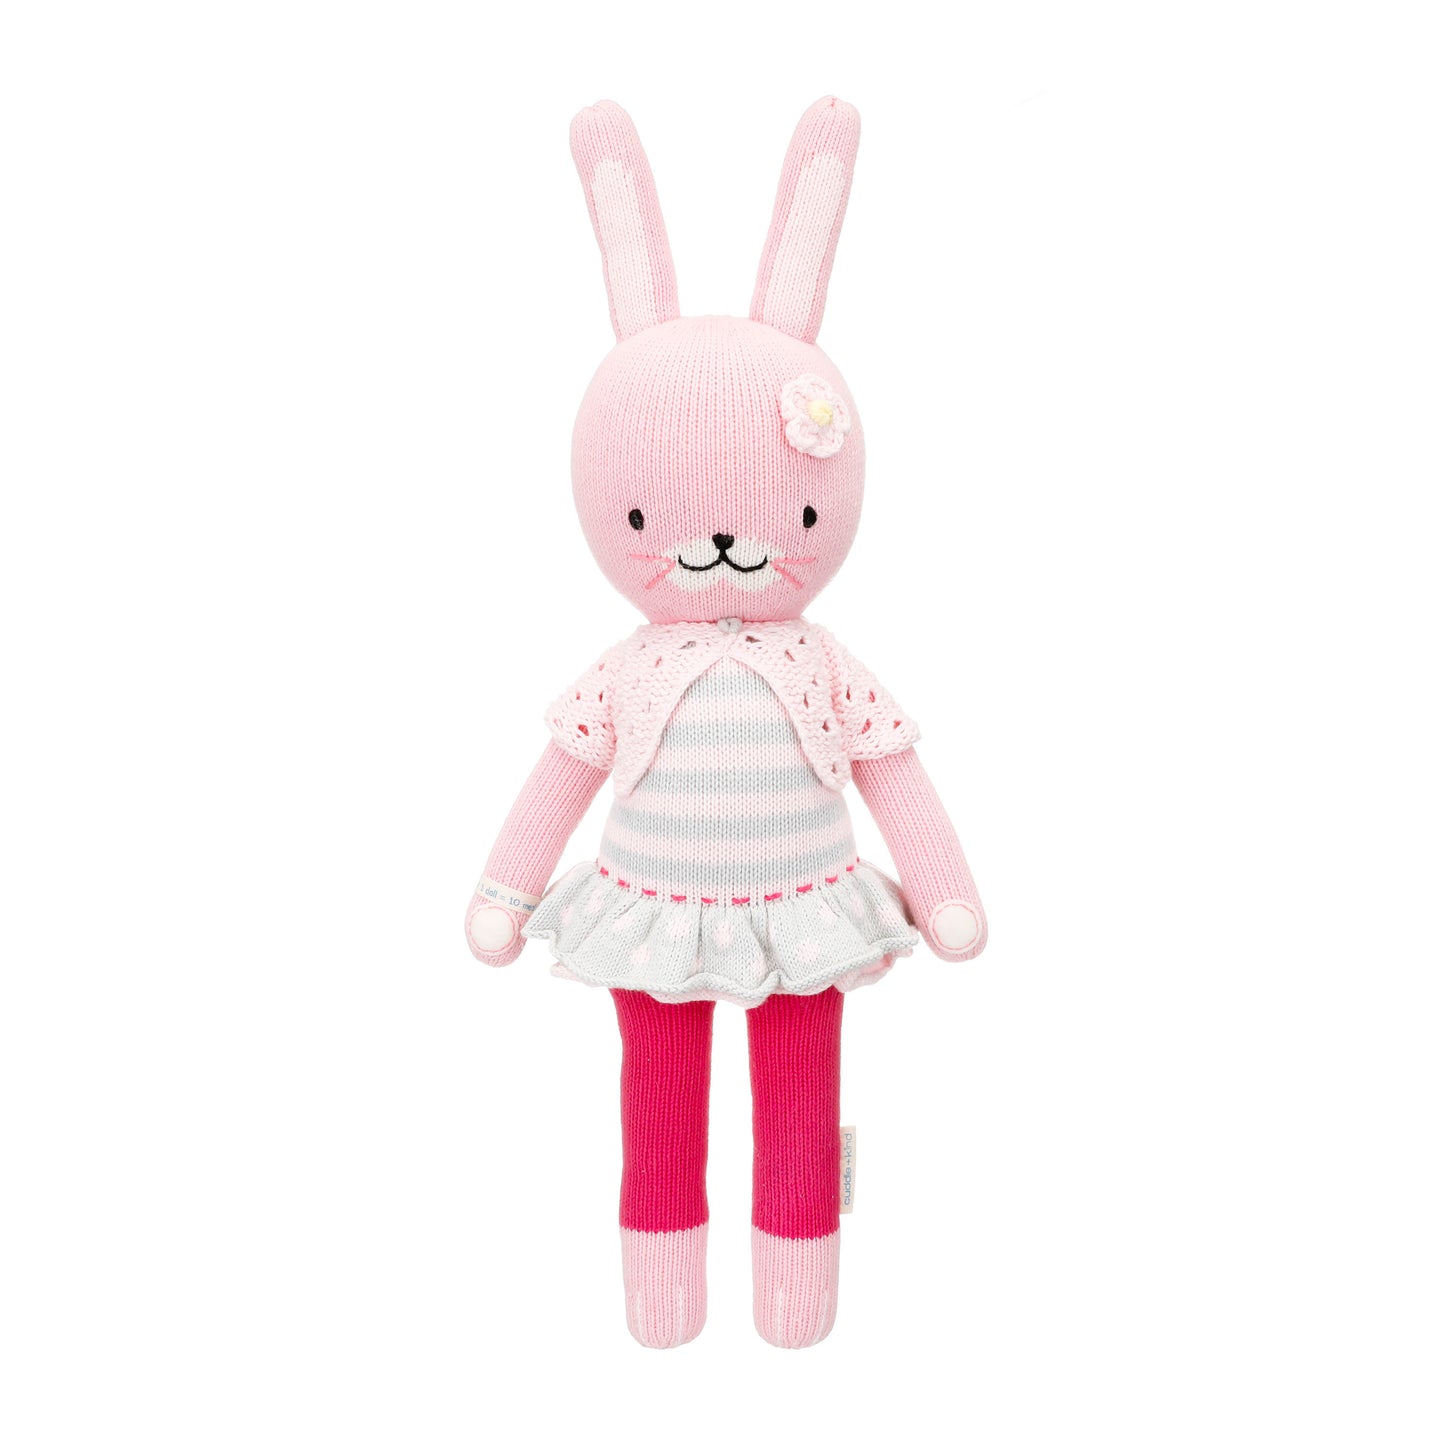 Chloe the bunny shown from 360°.  Chloe is pink, and she is wearing a gray and white striped dress and pink short-sleeved cardigan.